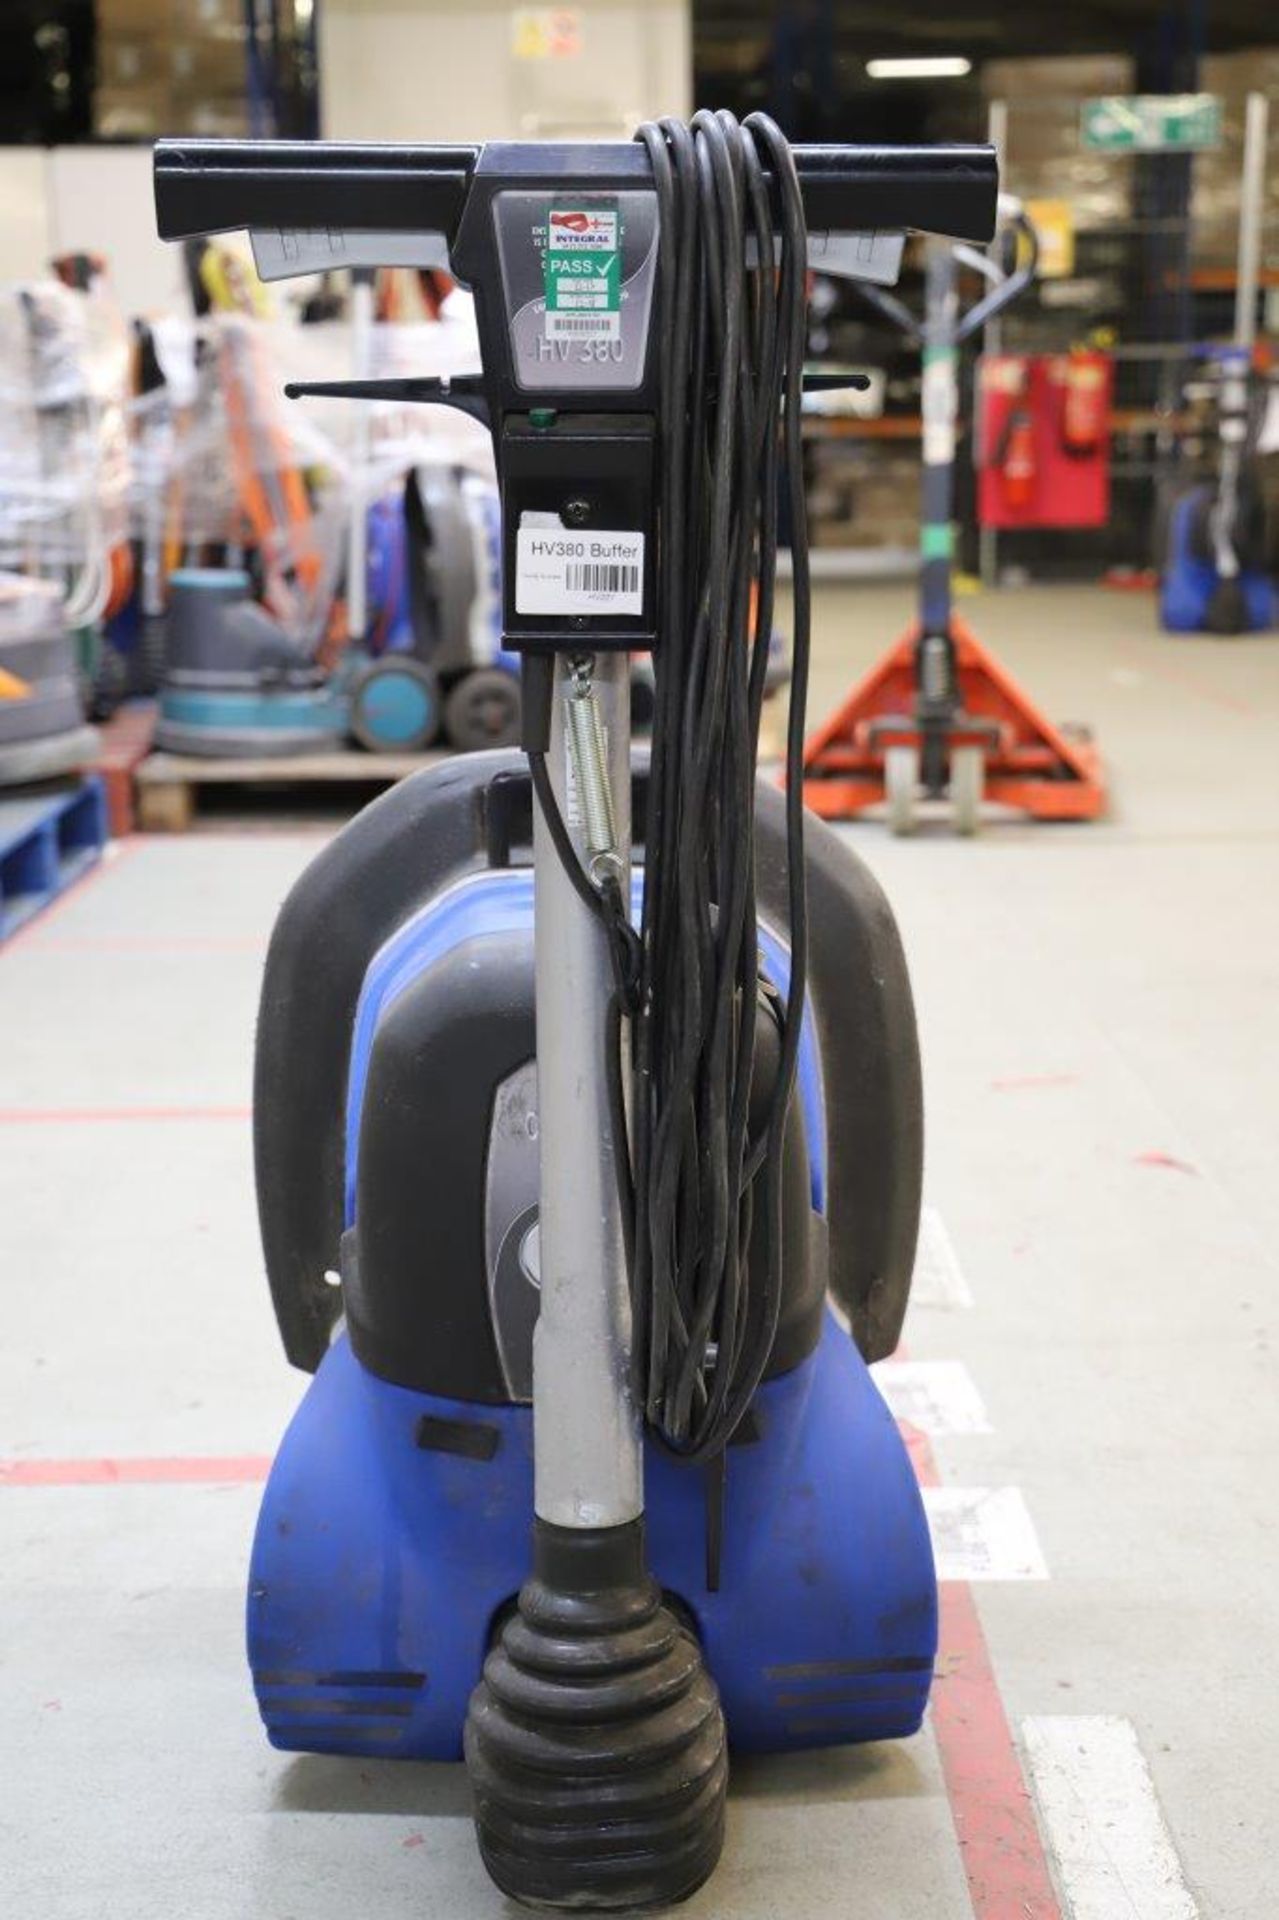 Two Premiere HV380 Rotary Floor Cleaning Machines for Hard Floors & Carpet Care - Image 2 of 2